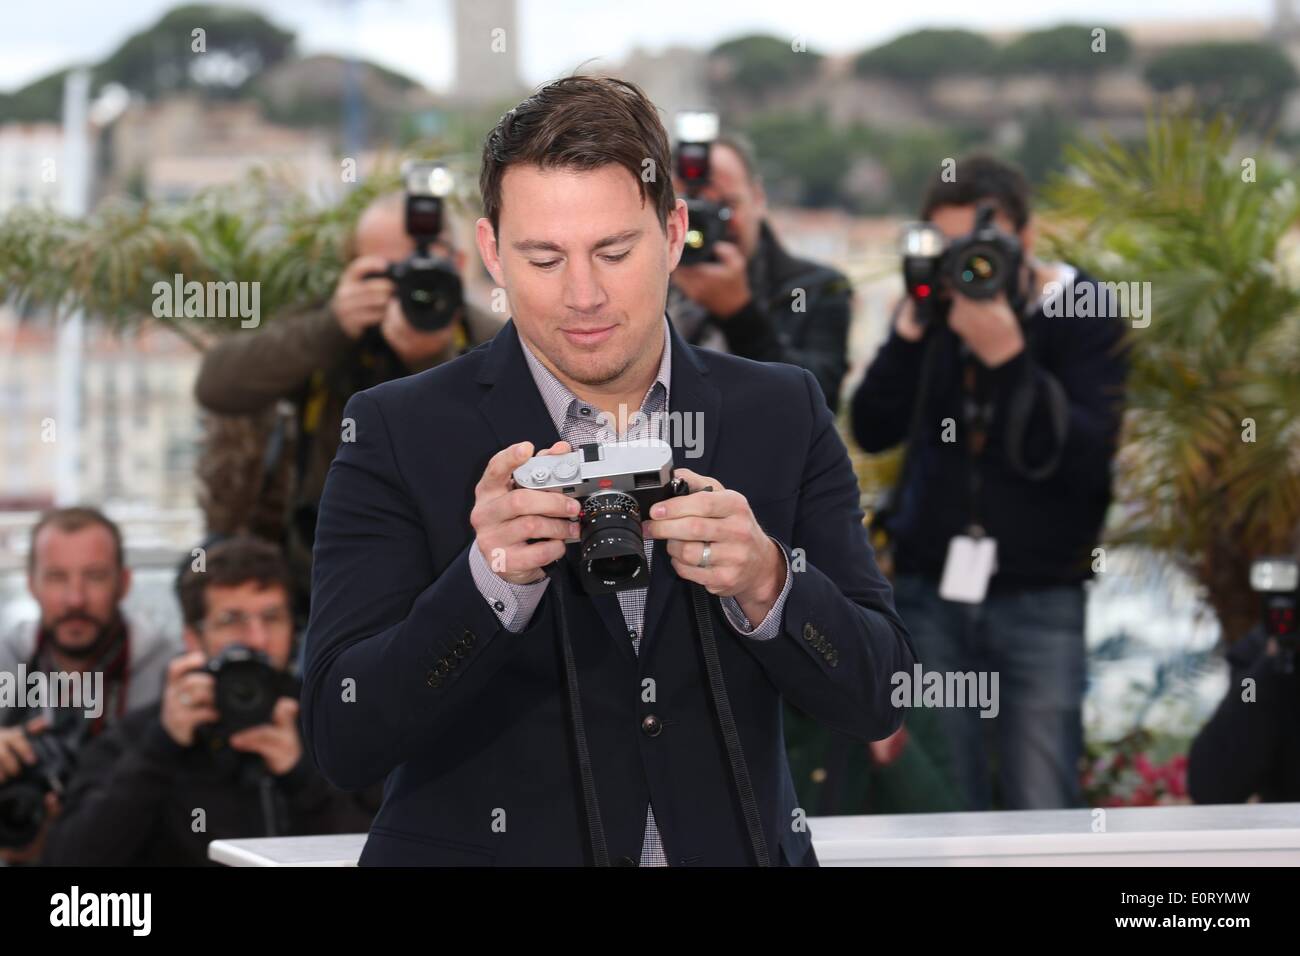 Cannes, France. 19th May, 2014. Actor Channing Tatum attends the photocall of 'Foxcatcher' during the 67th Cannes International Film Festival at Palais des Festivals in Cannes, France, on 19 May 2014. Photo: Hubert Boesl /dpa/Alamy Live News Stock Photo